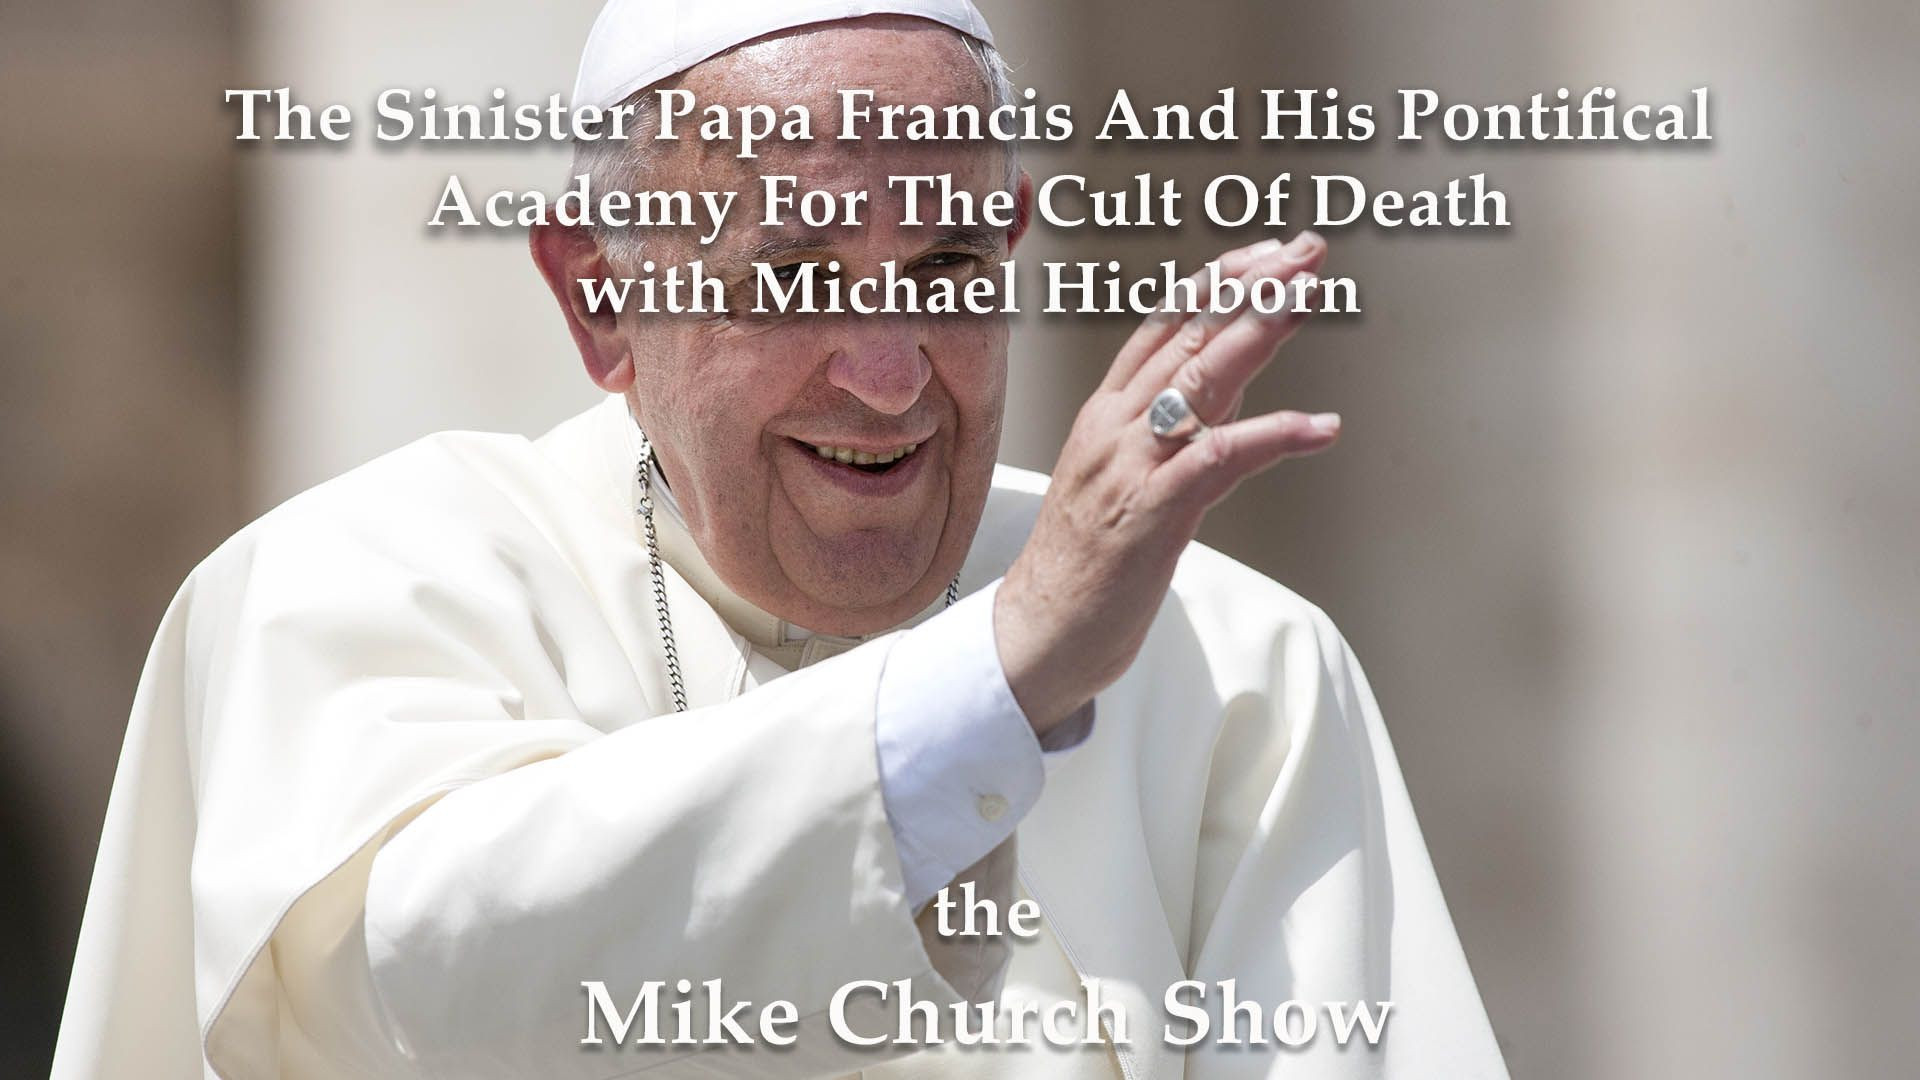 The Sinister Papa Francis And His Pontifical Academy For The Cult Of Death with Michael Hichborn